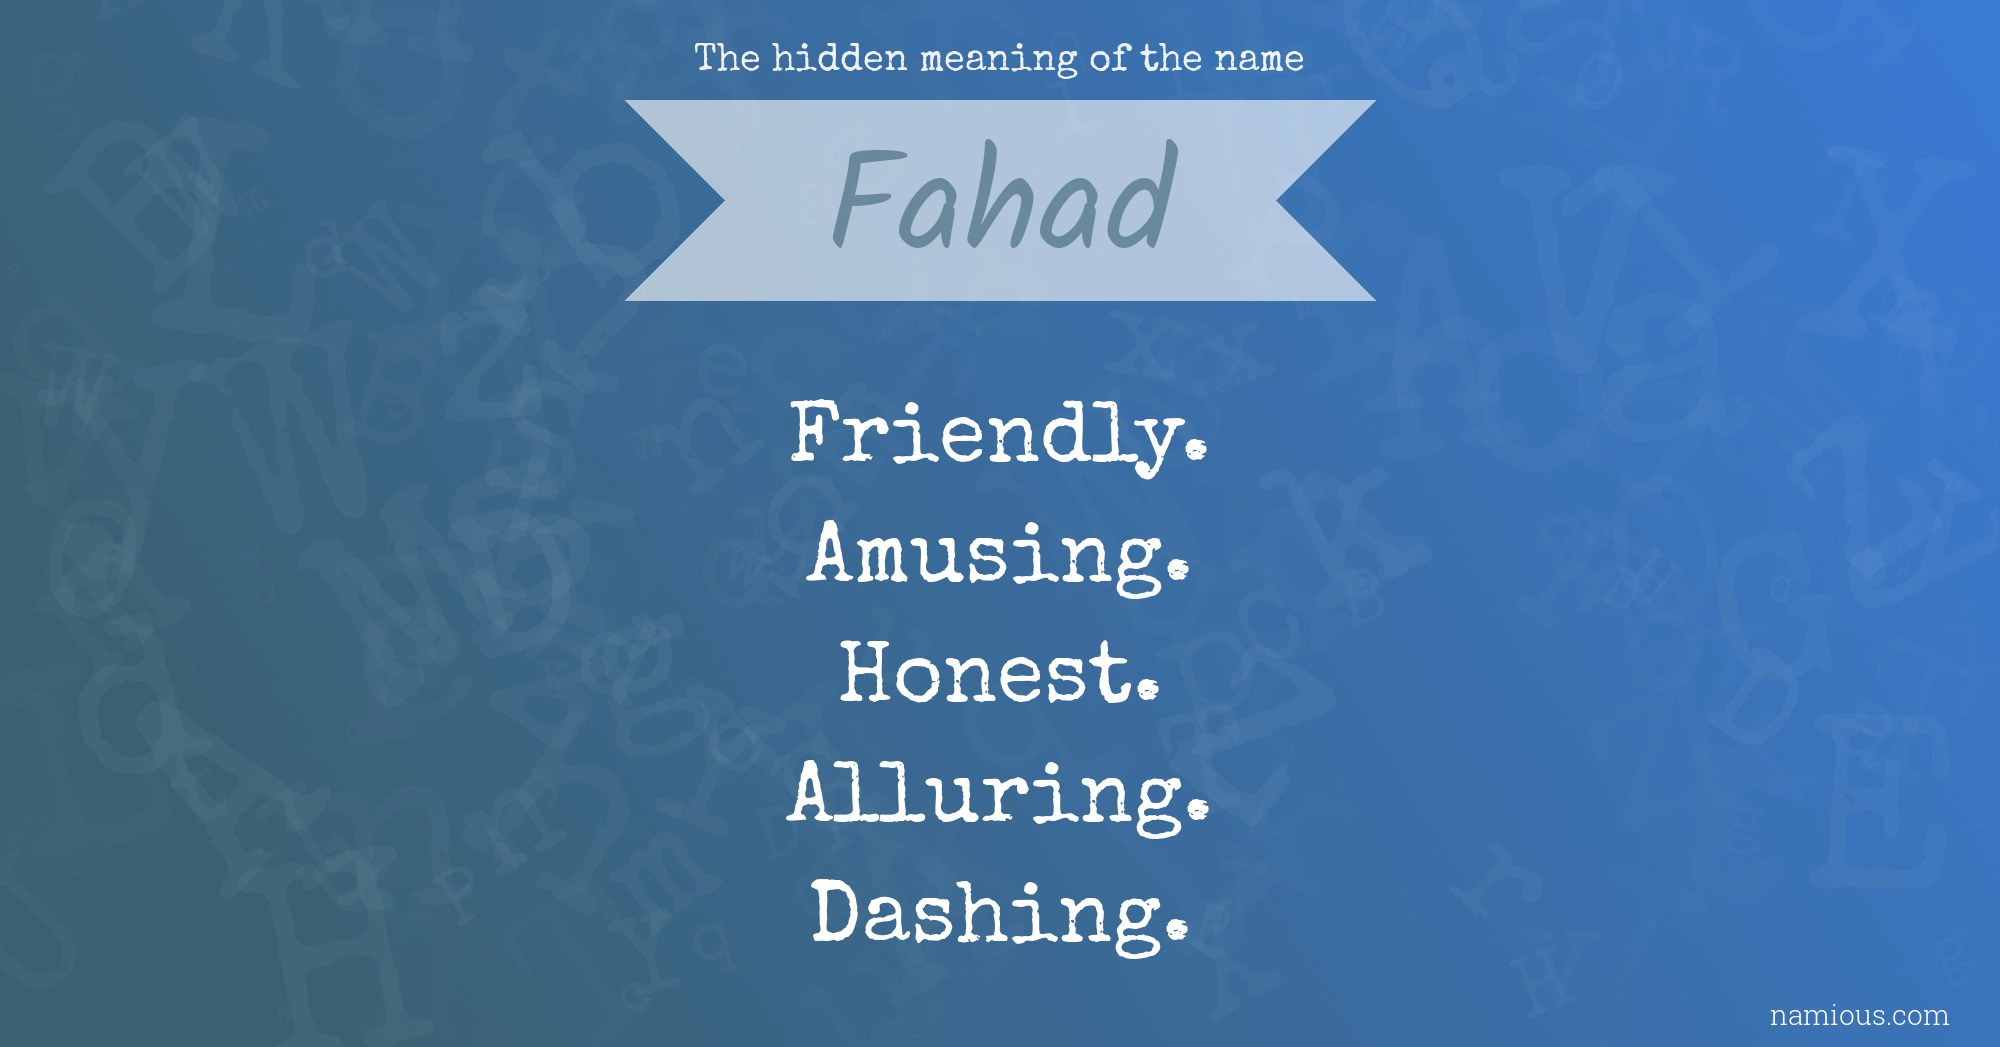 The hidden meaning of the name Fahad